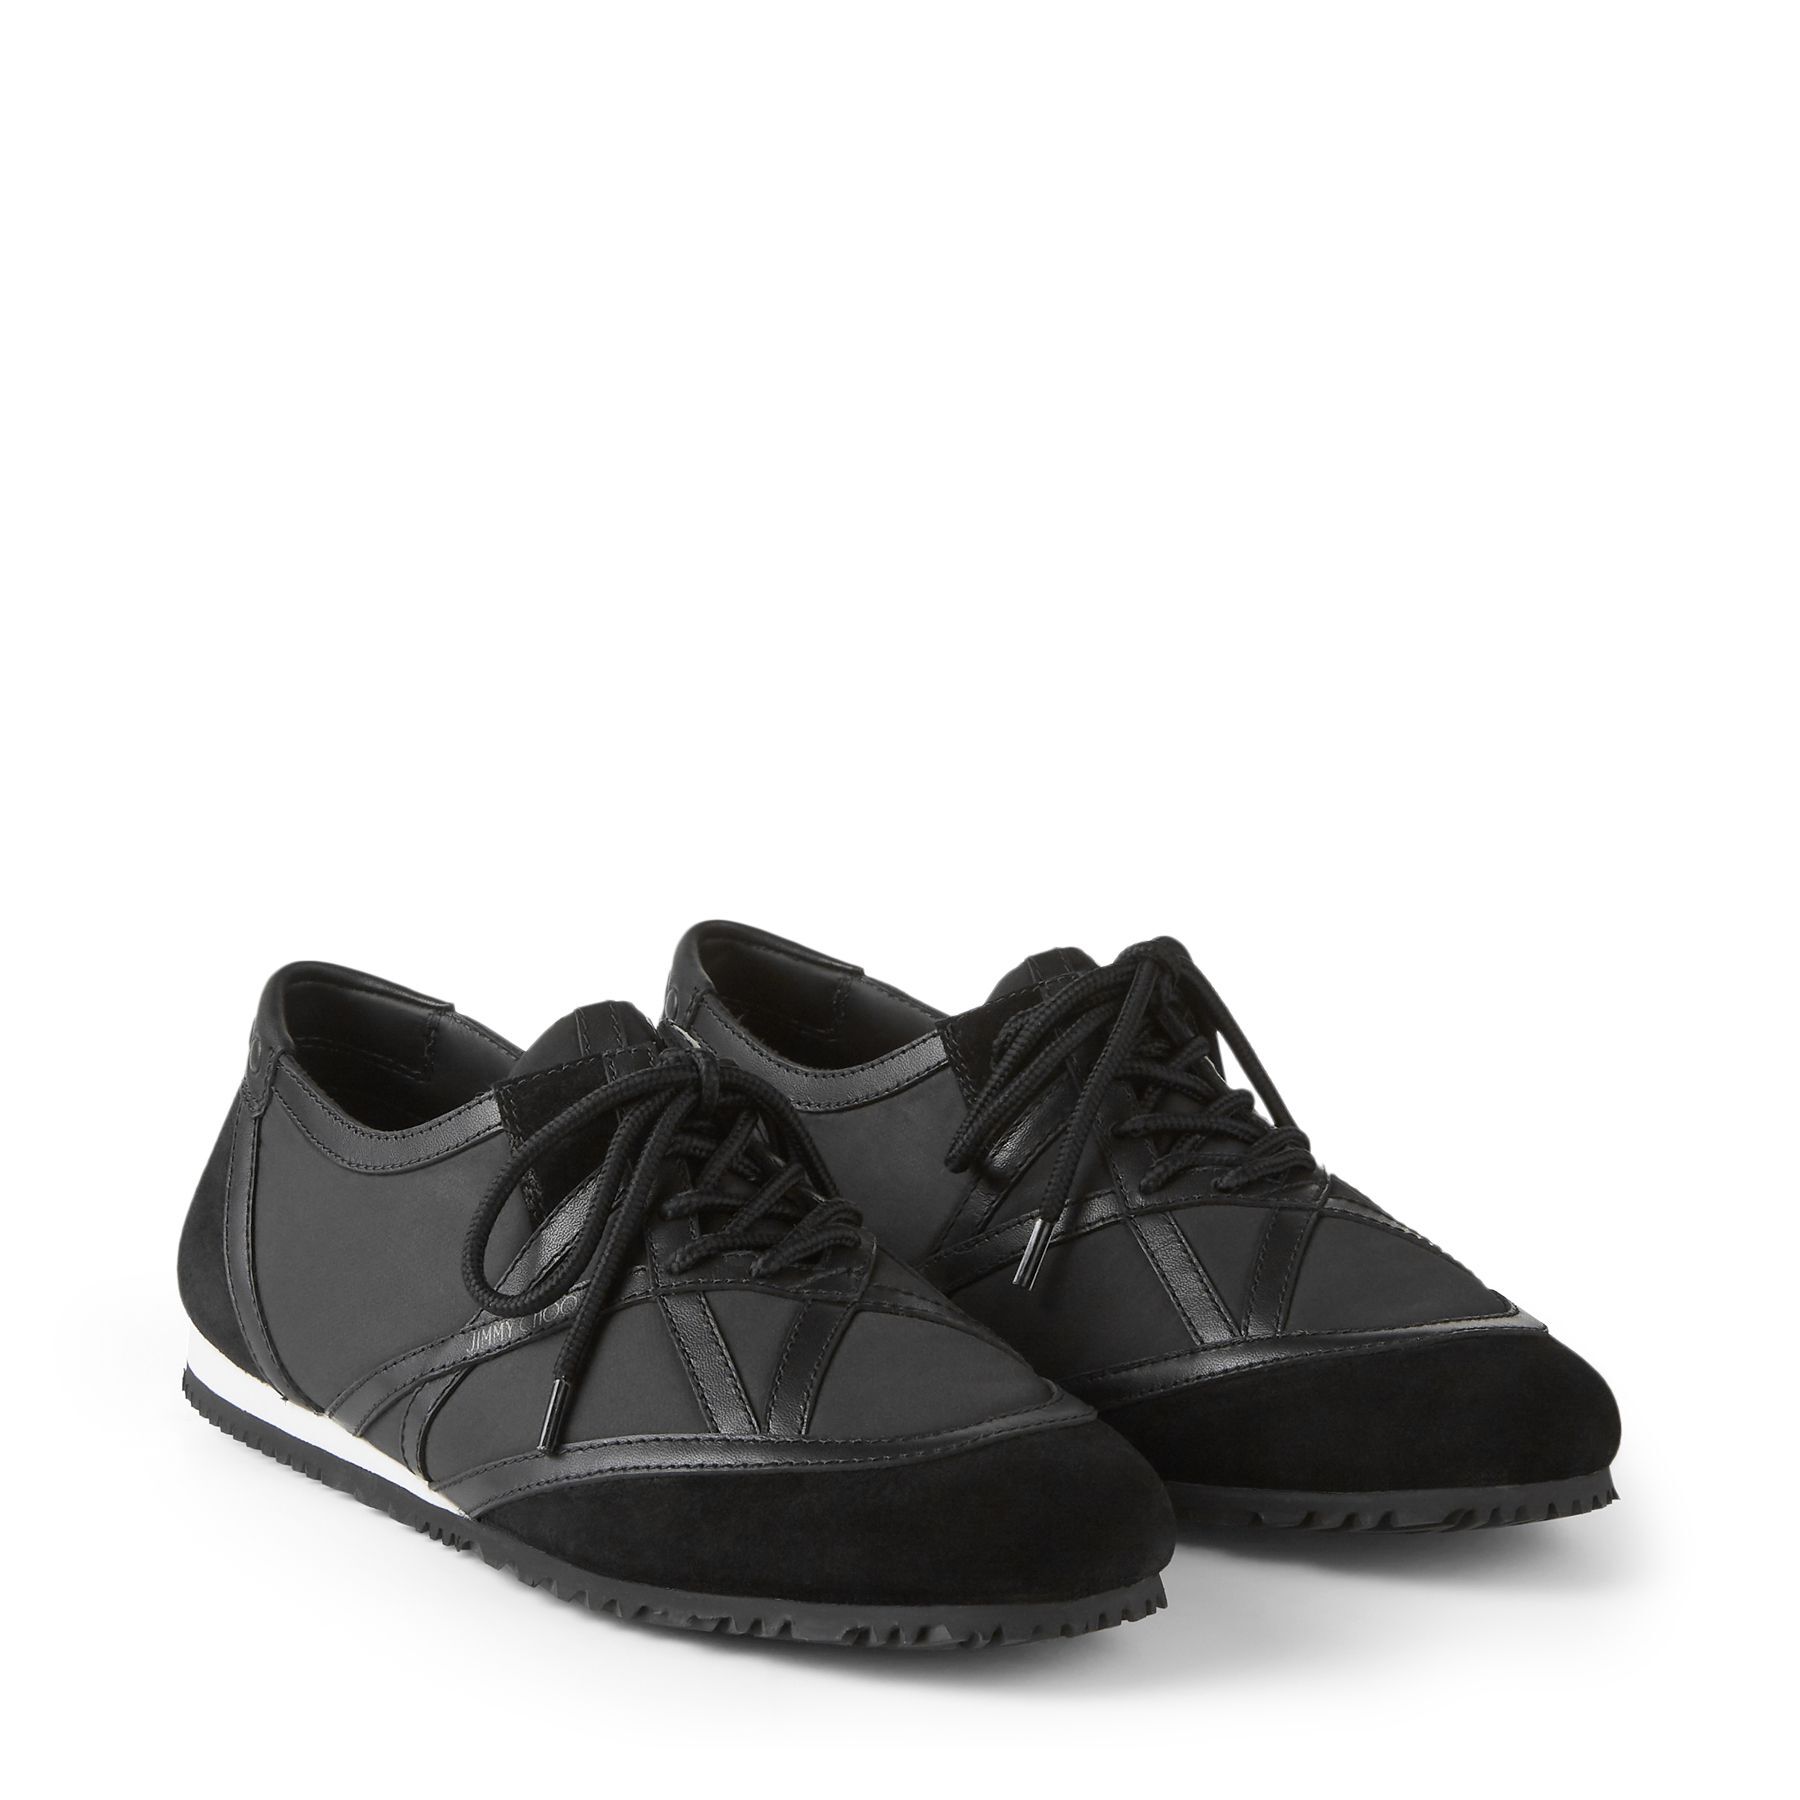 Black Crosta Suede, Calf Leather and Nylon Low-Top Trainers | KATO/F ...